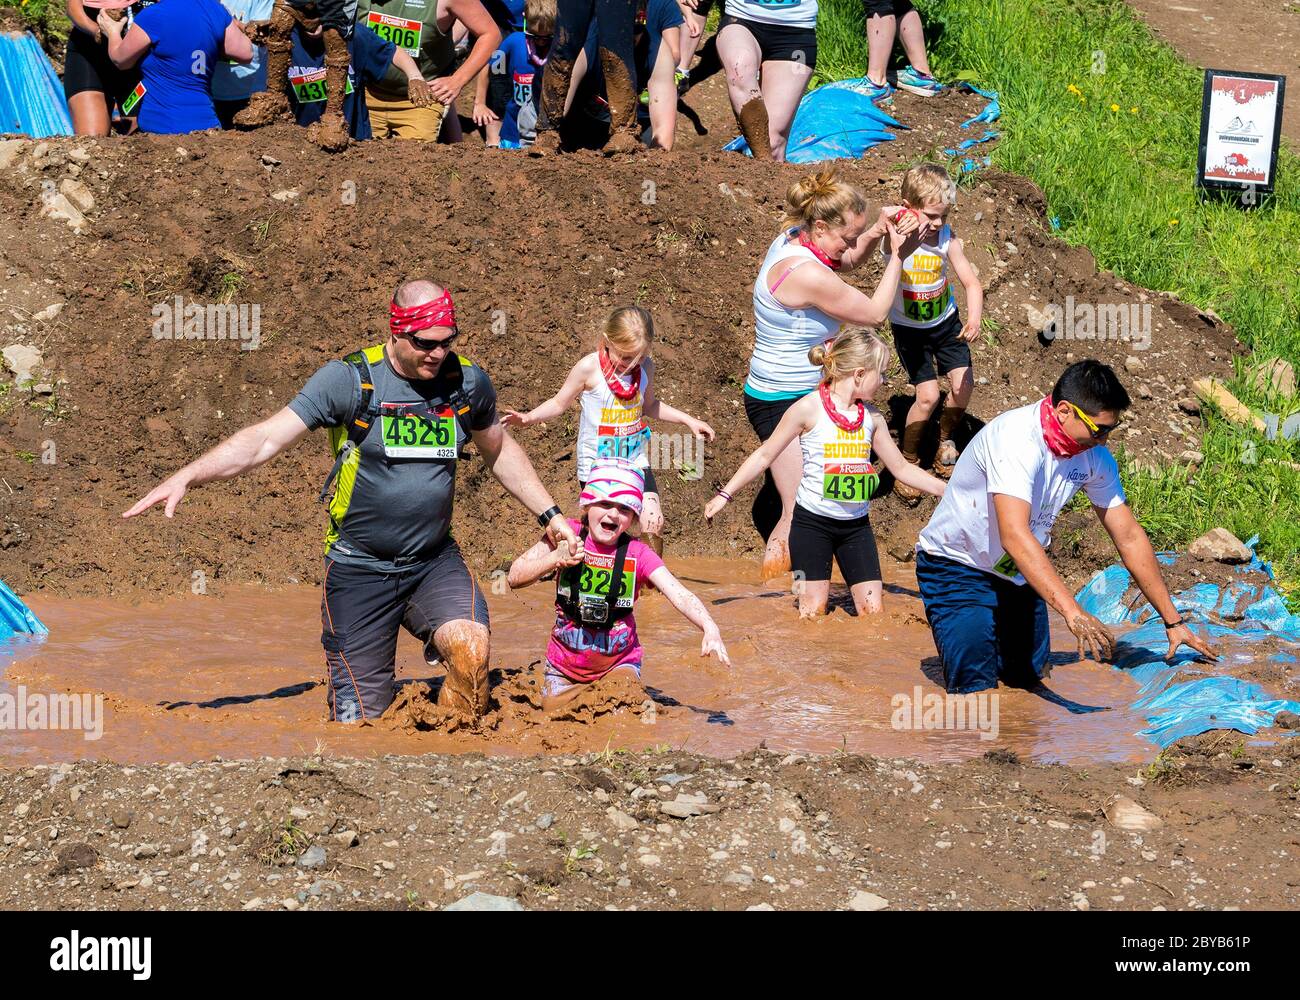 Poley Mountain, New Brunswick, Canada - June 10, 2017: Participating in the annual fundraiser 'Mud Run For Heart'. People wade through mus and water. Stock Photo